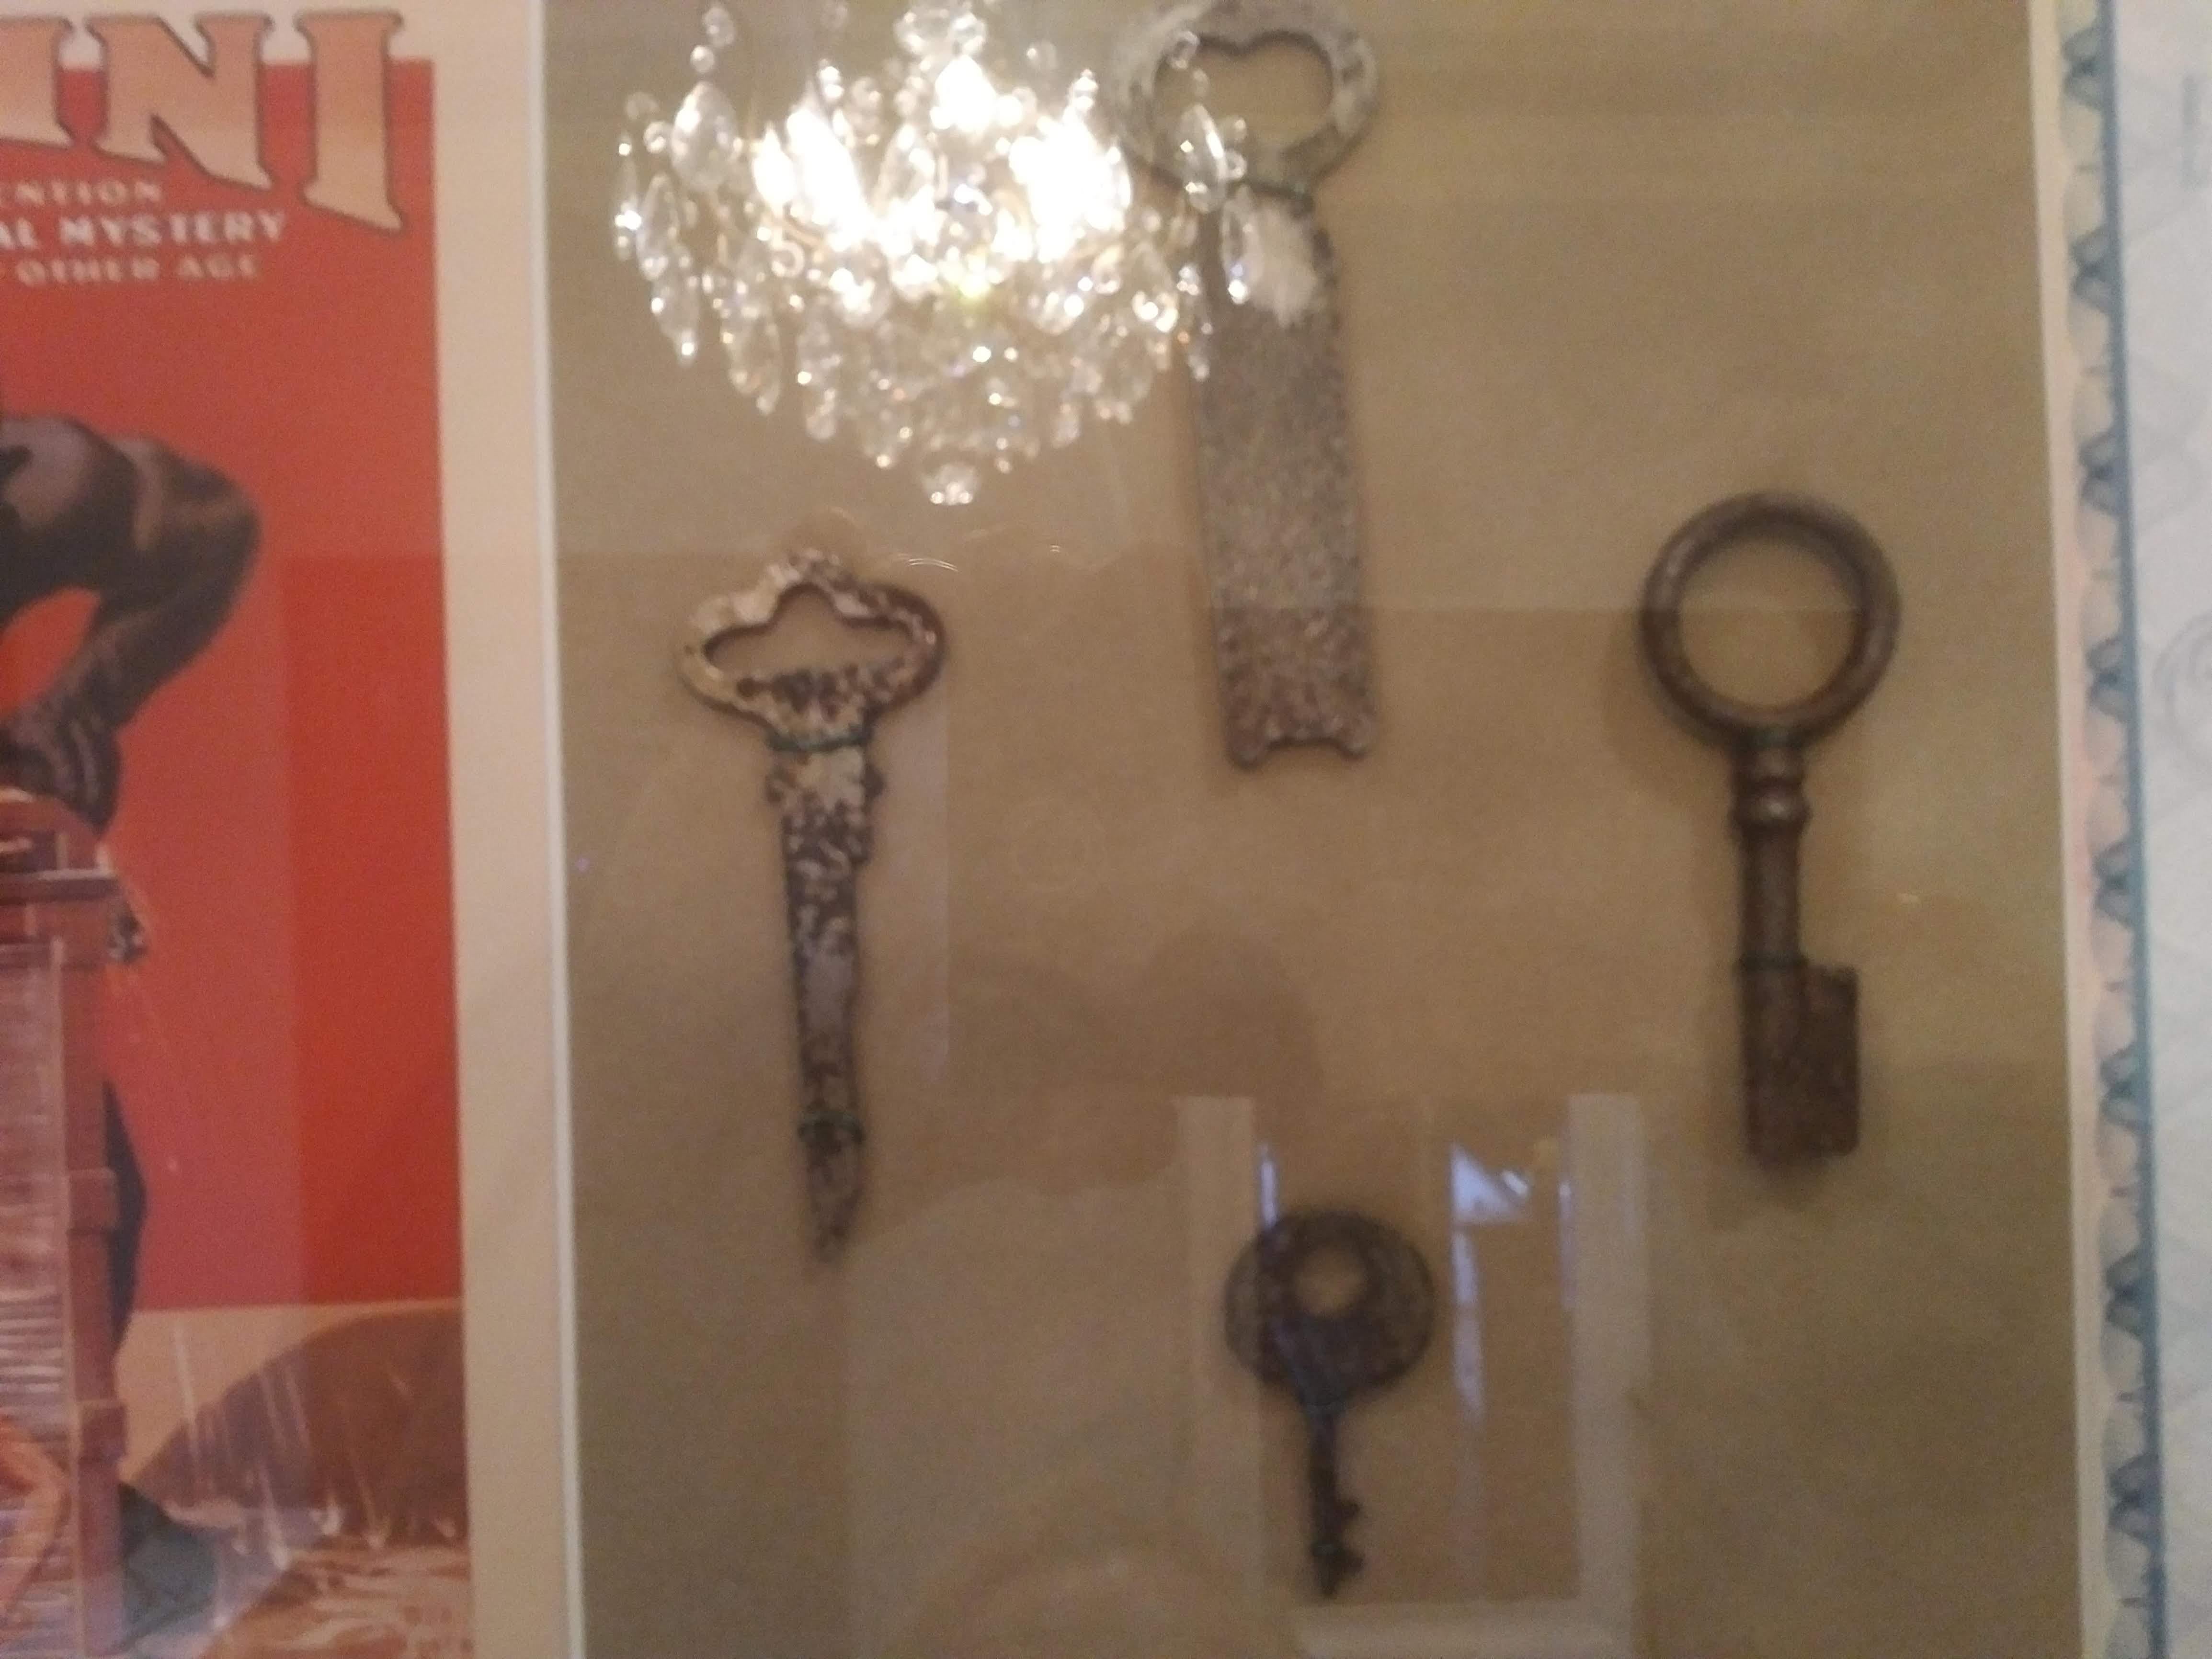 Original Houdini Keys from Houdini Museum with Certificate of Authenticity 6